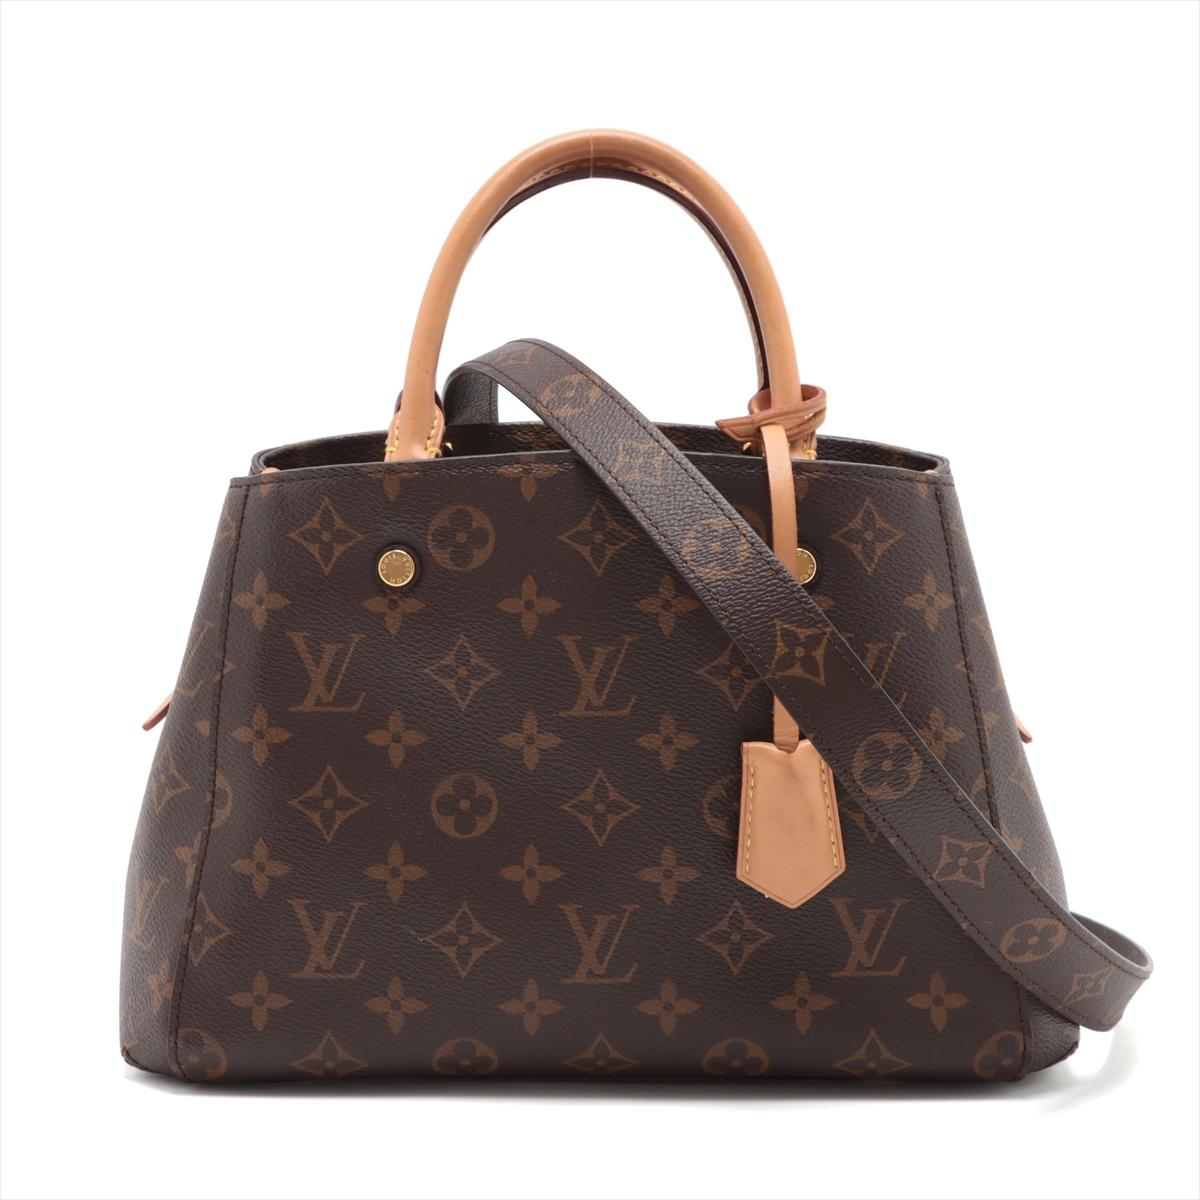 The Louis Vuitton Monogram Montaigne BB is a testament to timeless elegance and sophistication. The compact yet incredibly stylish handbag is designed to cater to the needs of modern, on-the-go fashion enthusiasts while exuding the signature charm